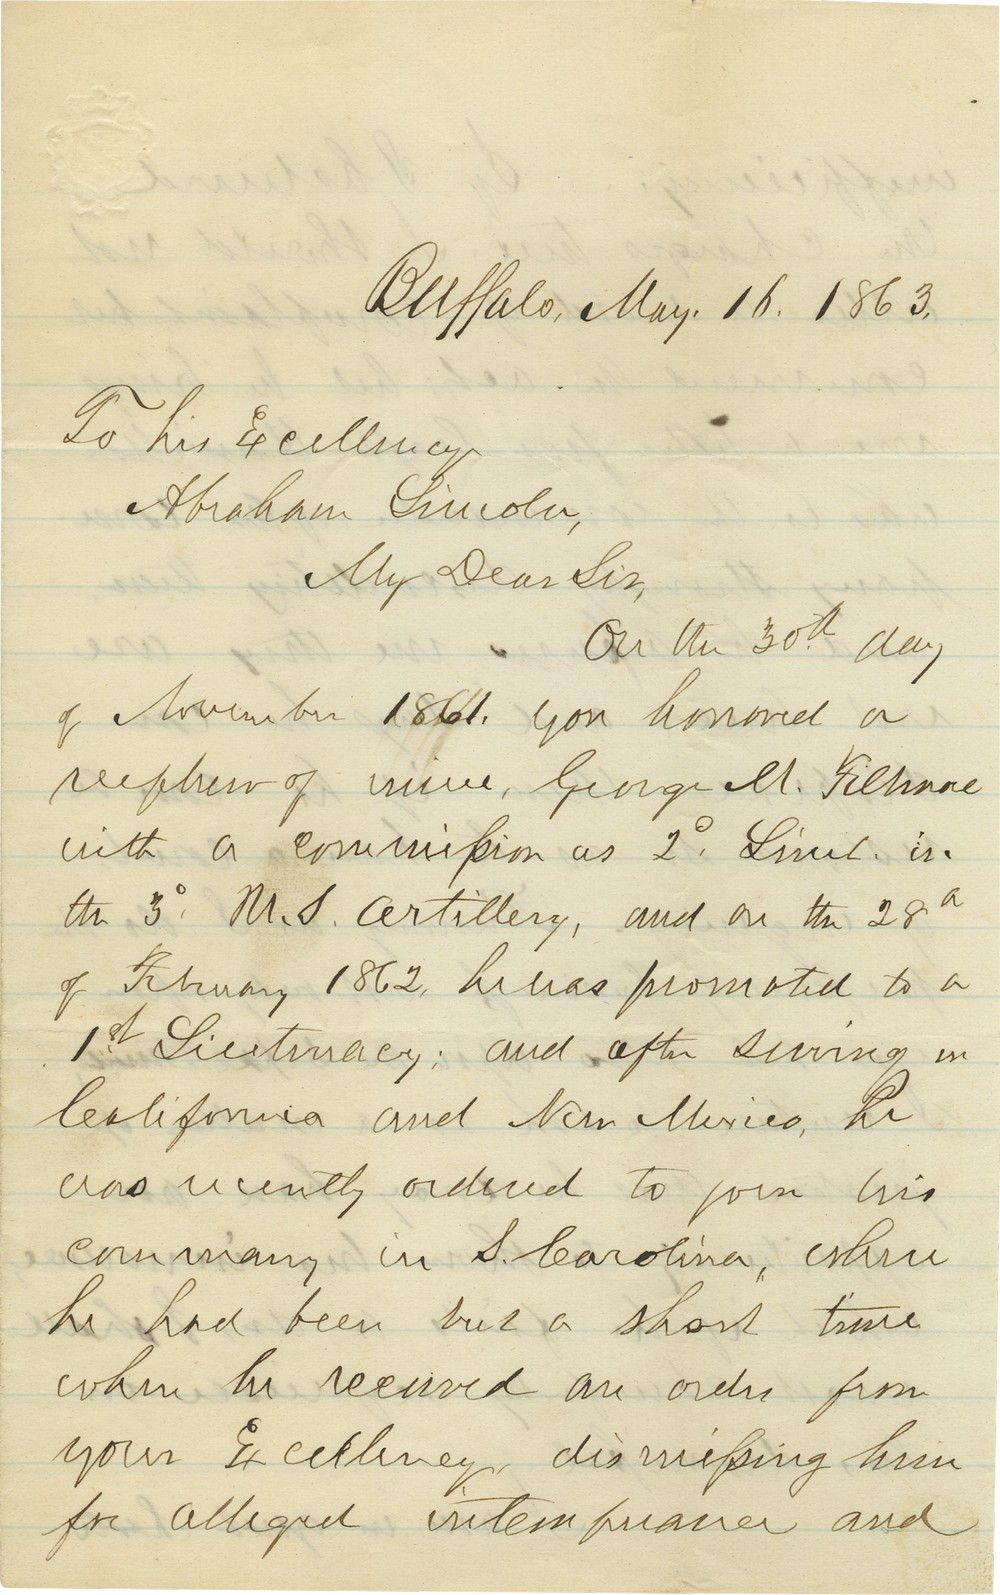 Millard Fillmore Asks Lincoln for a Favor; On the Back of the Letter, Lincoln Takes Steps to Oblige Him